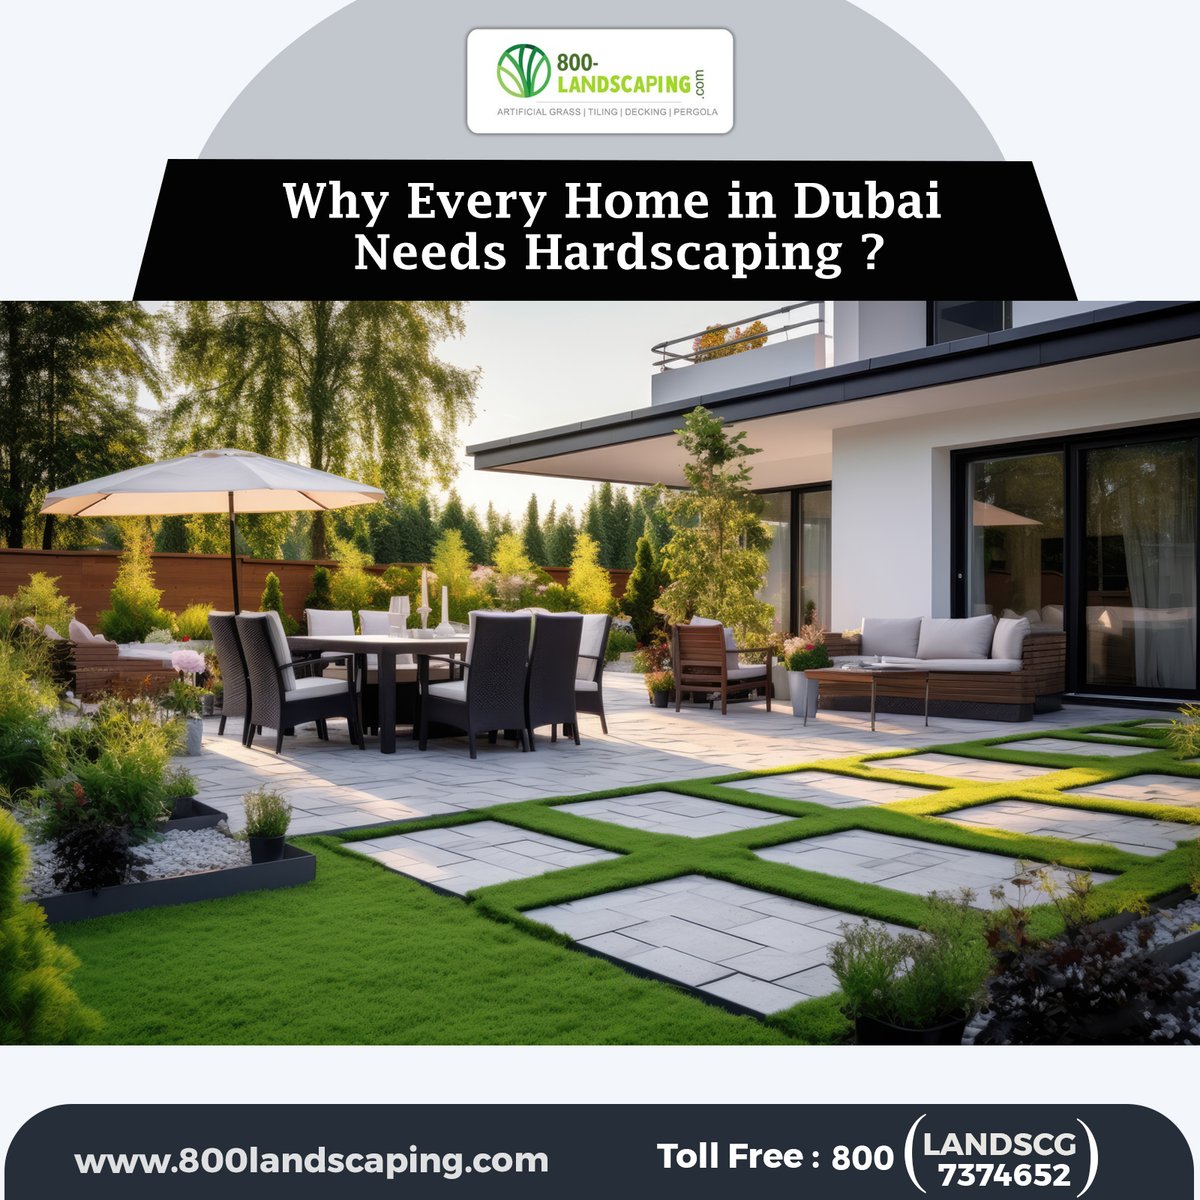 Looking to elevate your #outdoorspace in #Dubai?
Enter #hardscaping – the secret ingredient to transforming your yard into a #stunningoasis! 

Key points:
1️⃣ Beat the Heat
2️⃣ Low Maintenance
3️⃣ Extend Living Spaces
4️⃣ Boost Property Value

Call us now📞+971 56 982 3392
#UAE #Home